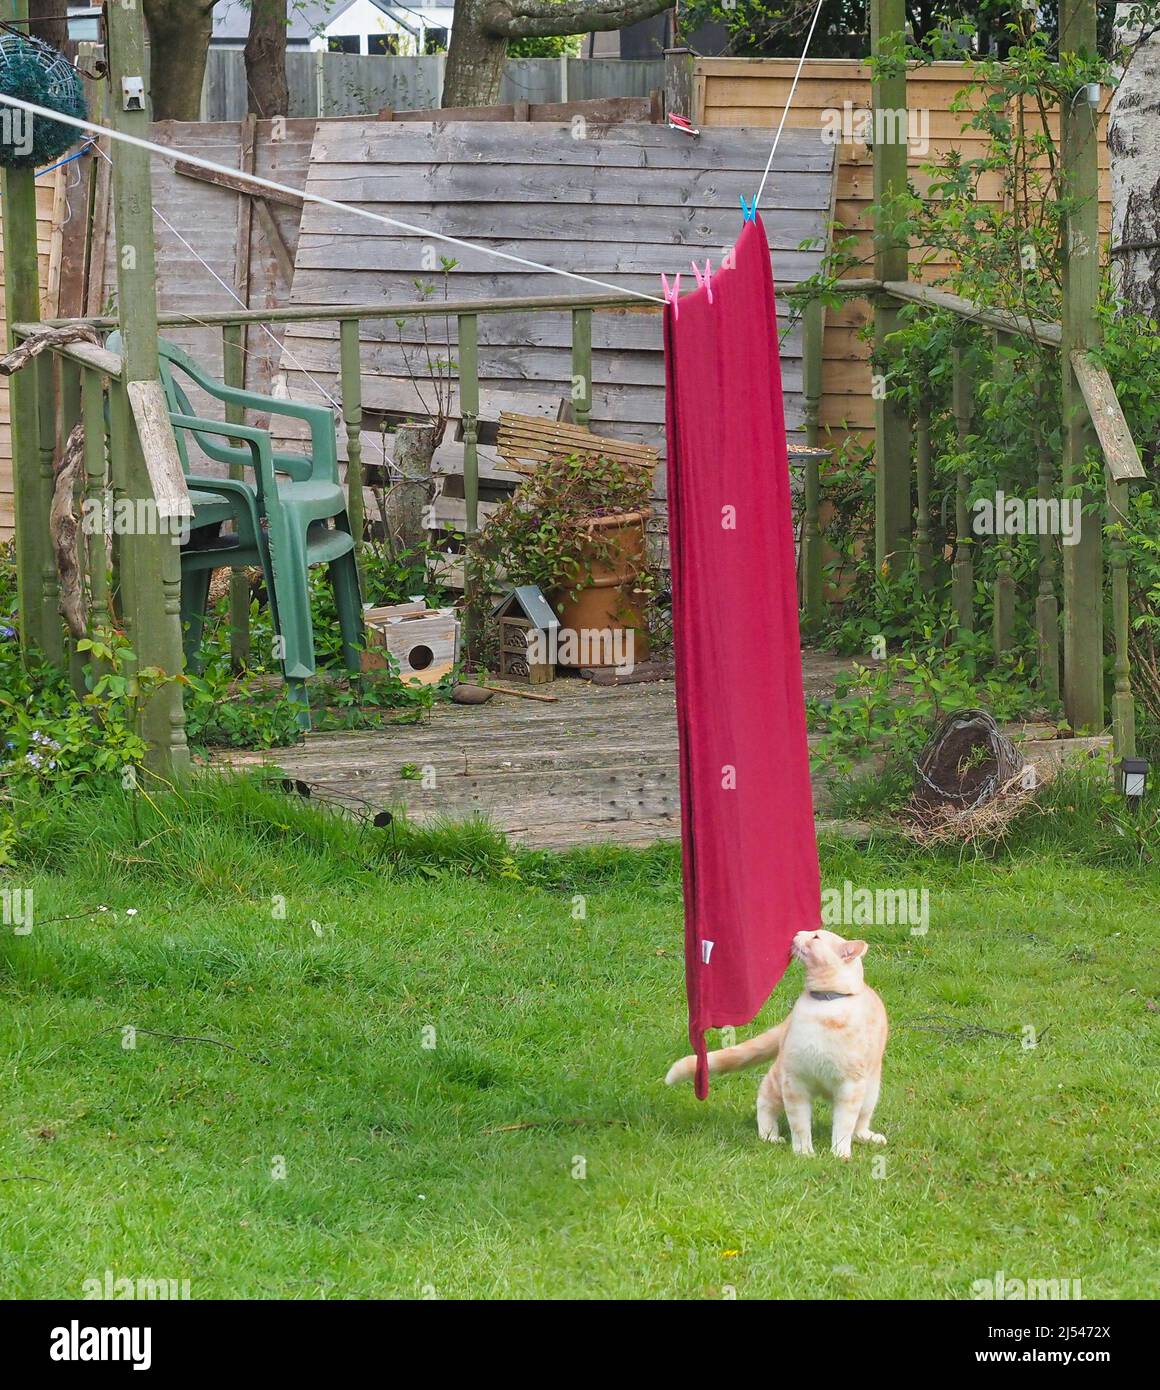 A light ginger cat sniffing a red blanket hanging on a washing line in a garden Stock Photo